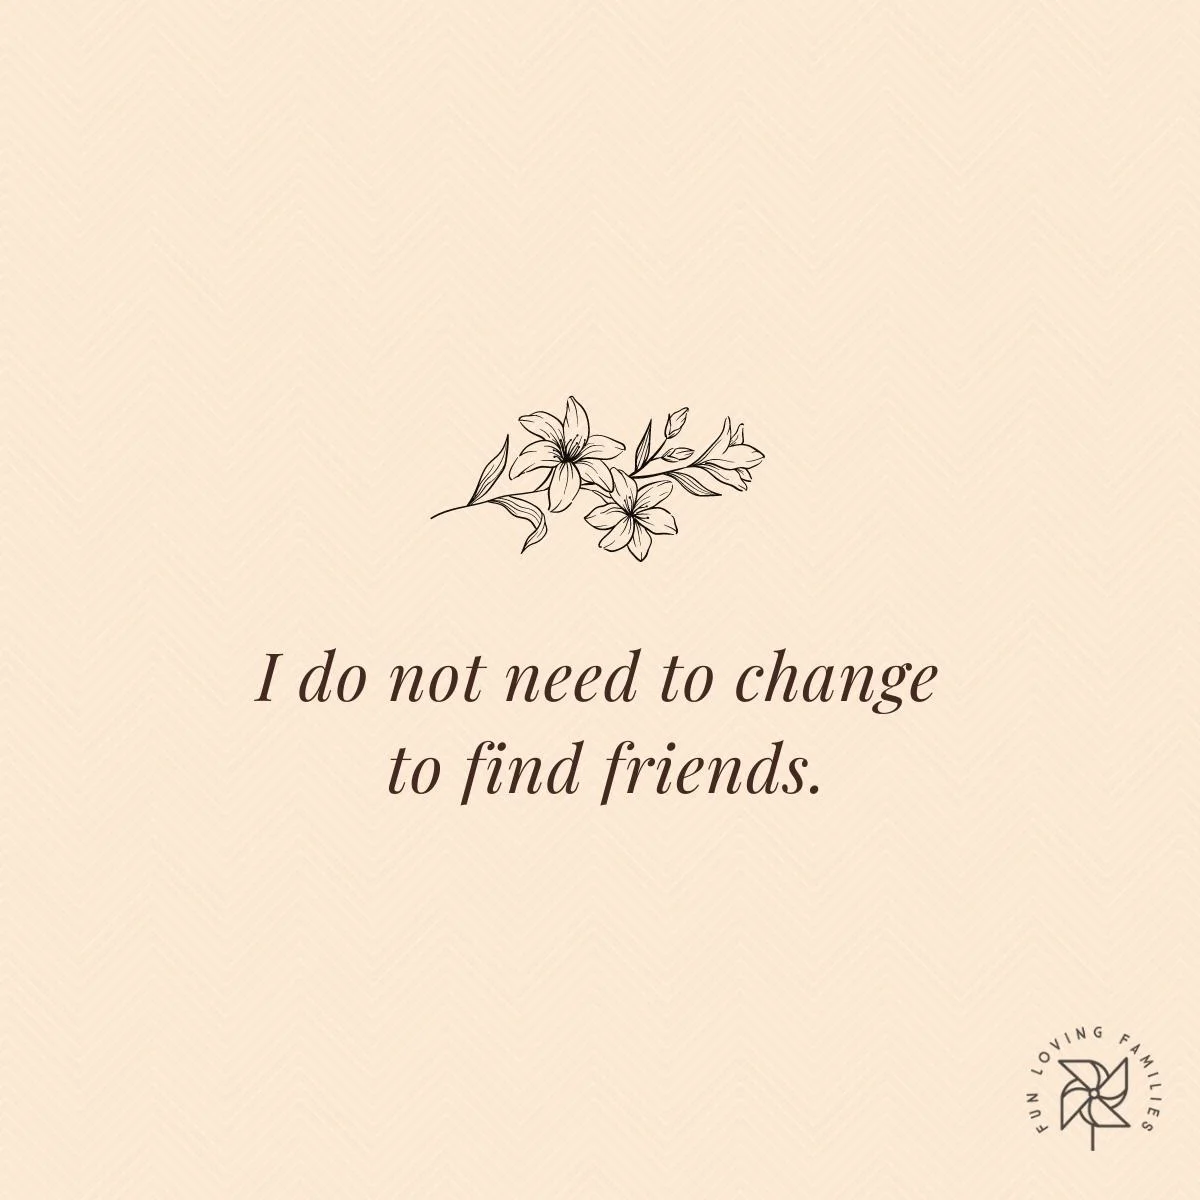 I do not need to change to find friends affirmation